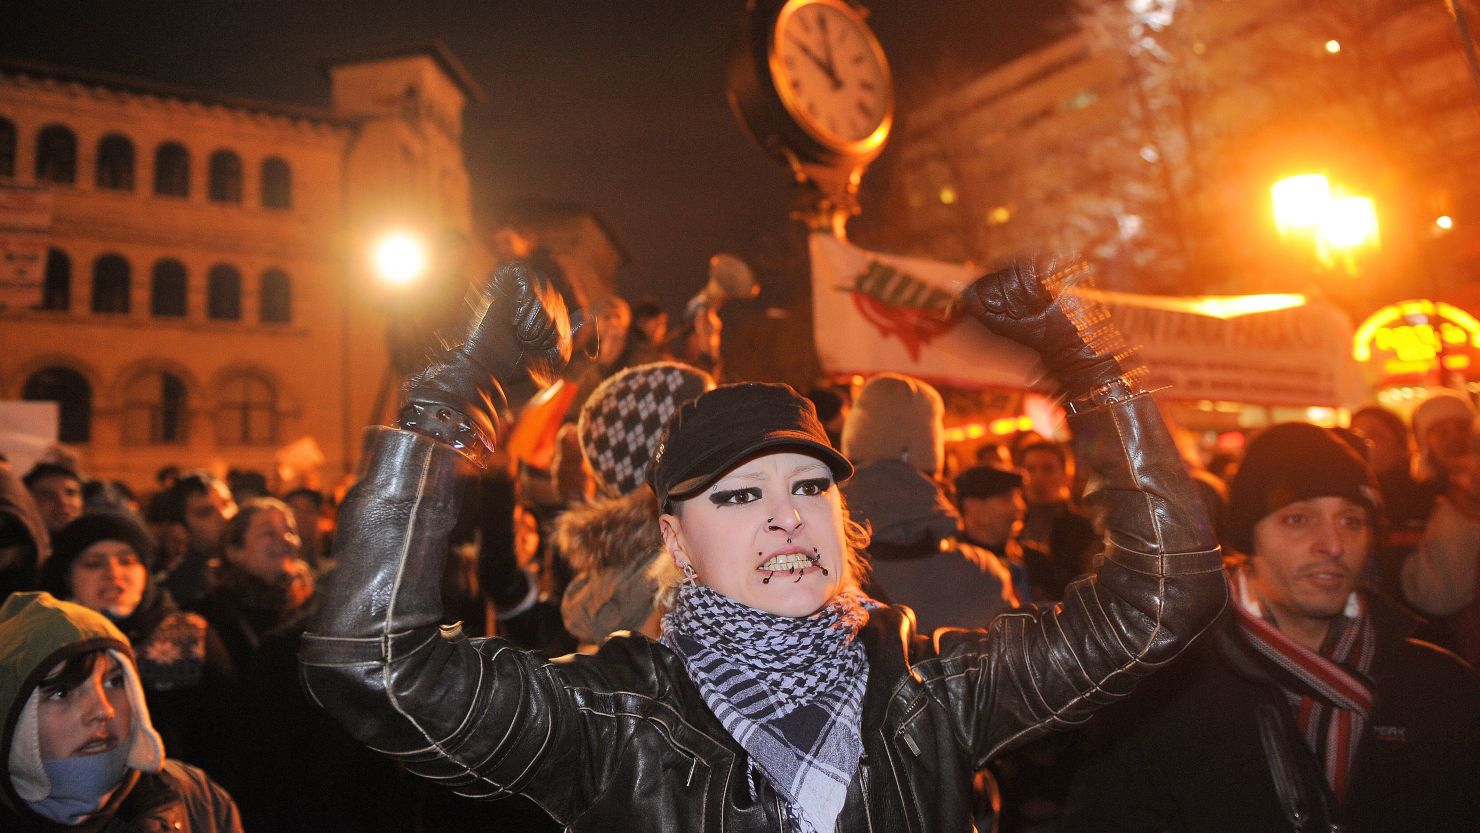 A protester gestures during an anti-presidential rally in Bucharest on January 17, 2012.